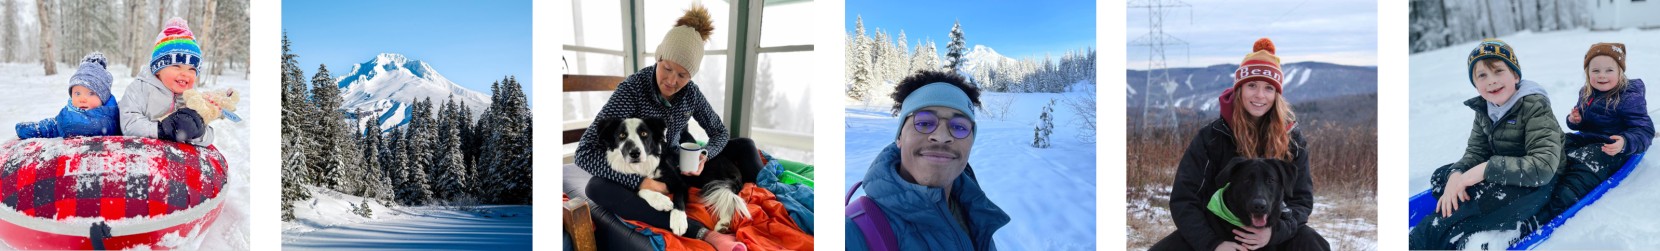 5 images of people enjoying the winter outdoors and 1 image of scenic snow covered mountain.